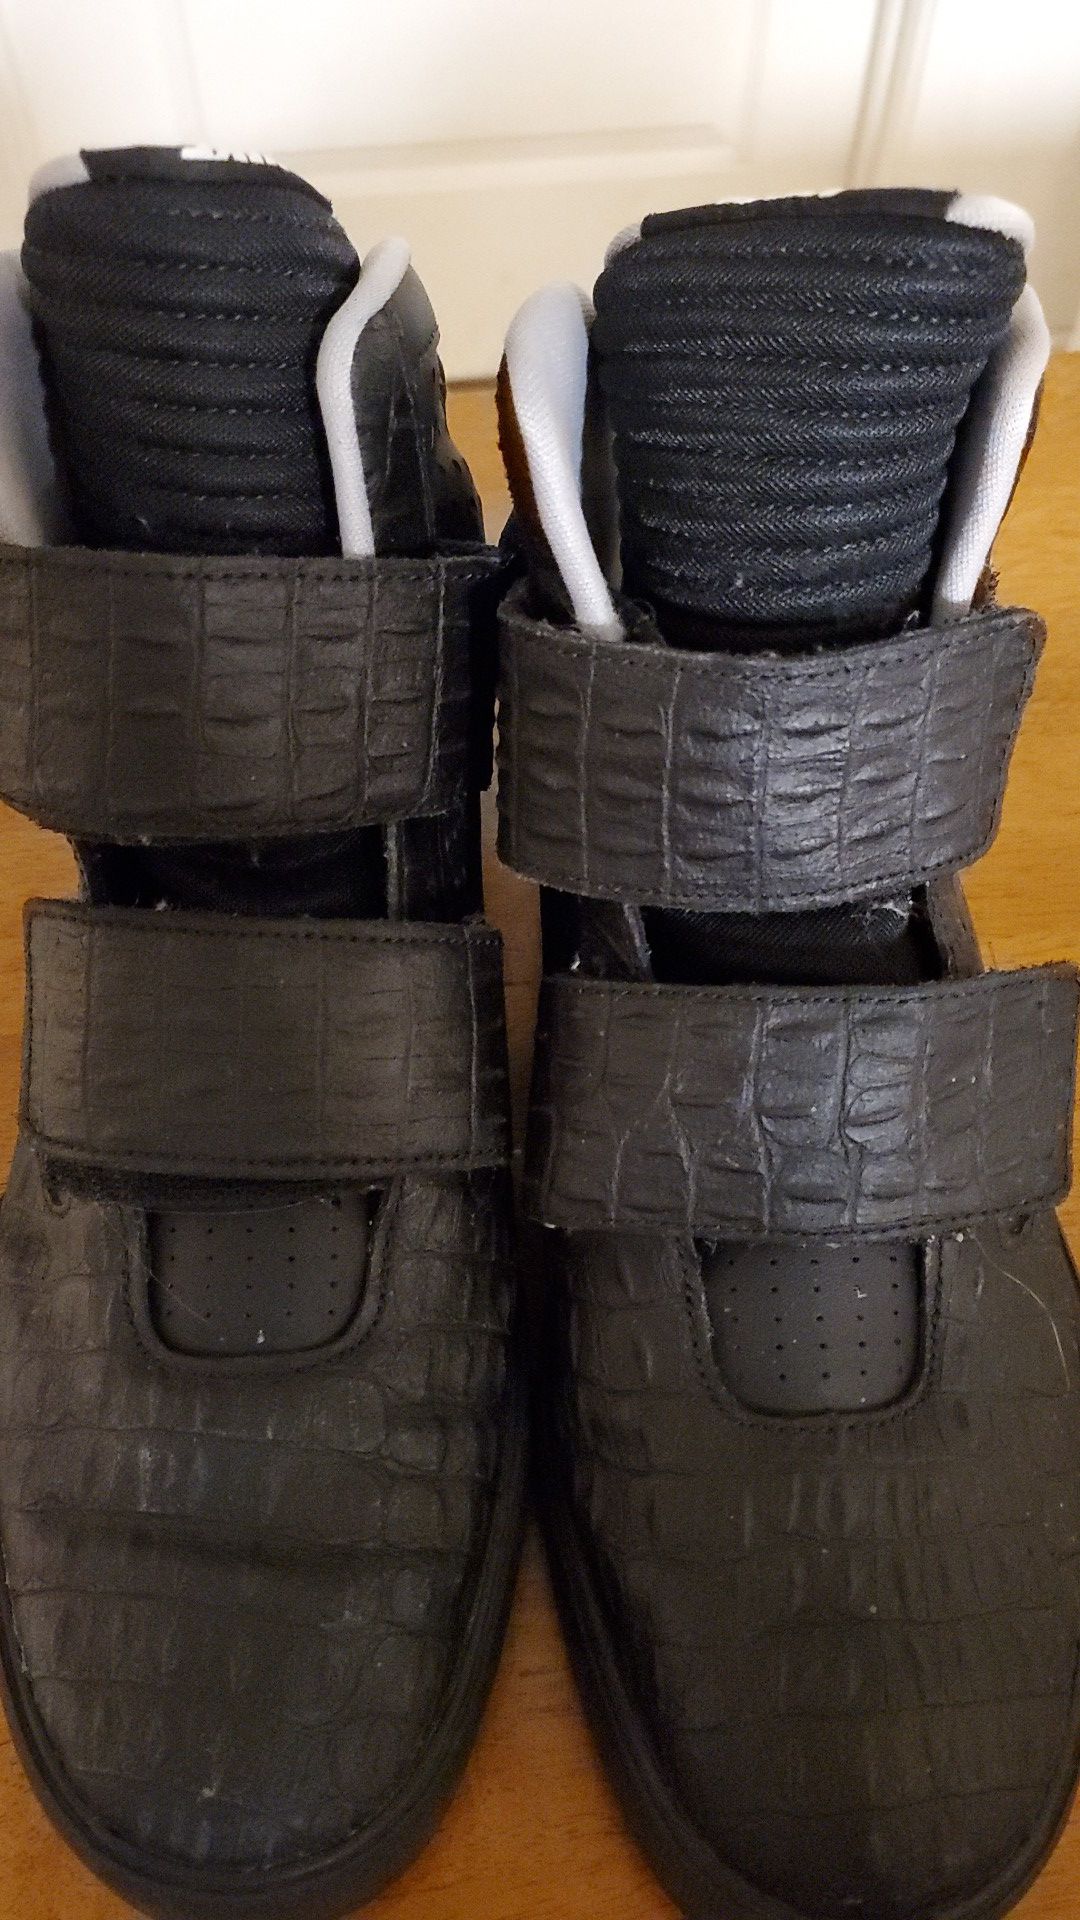 Nike flystepper 2k3..great condition size 10